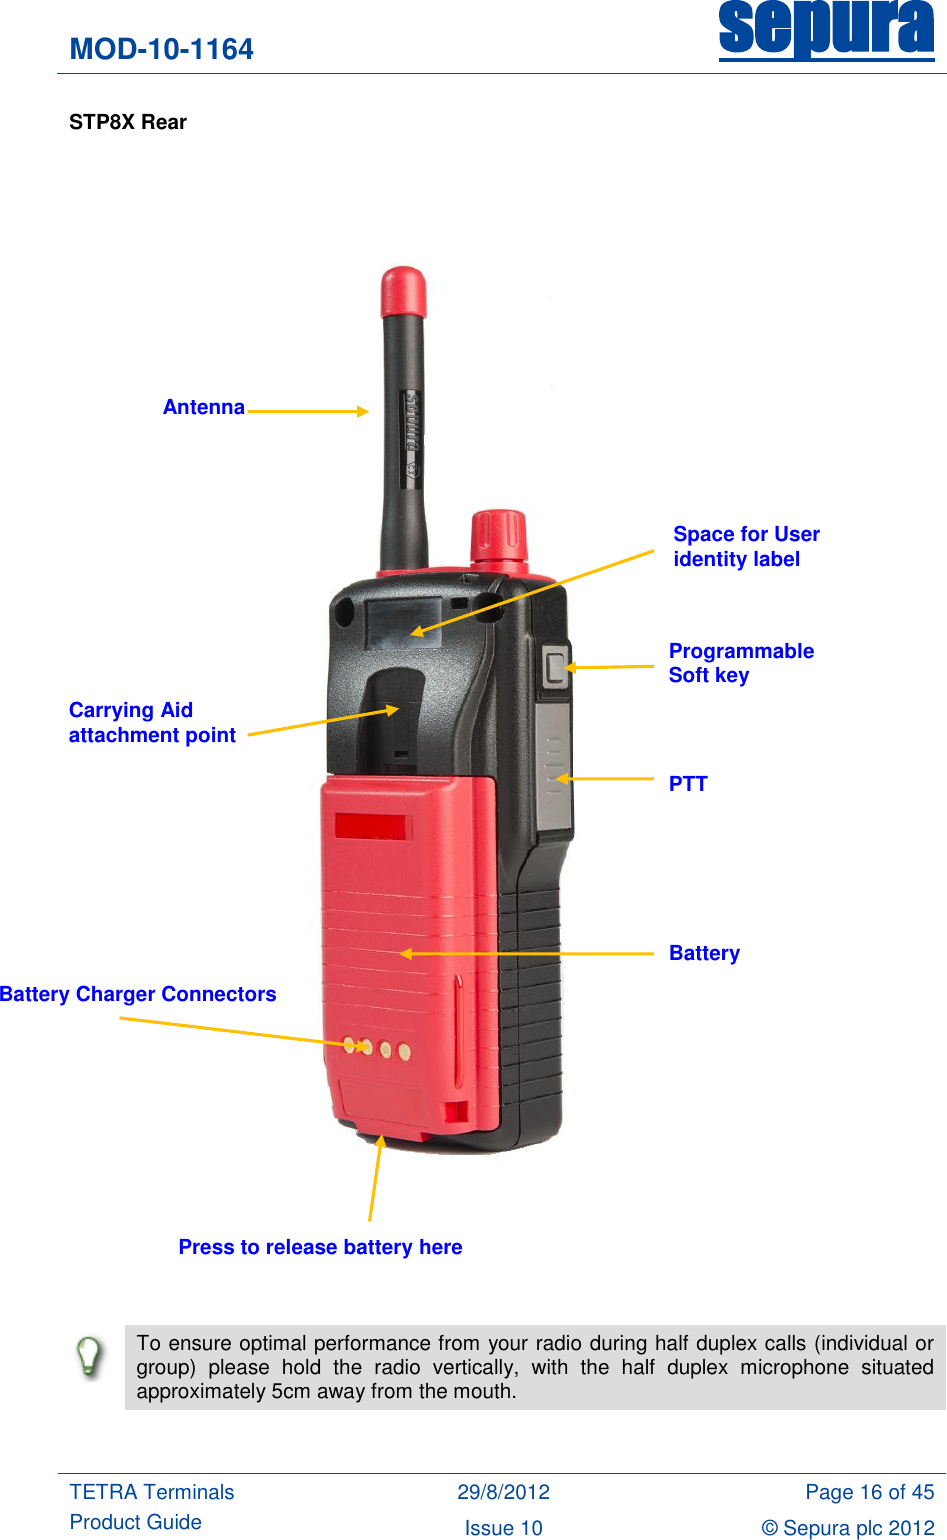 MOD-10-1164 sepura  TETRA Terminals Product Guide 29/8/2012 Page 16 of 45 Issue 10 © Sepura plc 2012   STP8X Rear            To ensure optimal performance from your radio during half duplex calls (individual or group)  please  hold  the  radio  vertically,  with  the  half  duplex  microphone  situated approximately 5cm away from the mouth.  Space for User identity label Programmable Soft key PTT Battery Battery Charger Connectors Antenna Carrying Aid attachment point Press to release battery here 